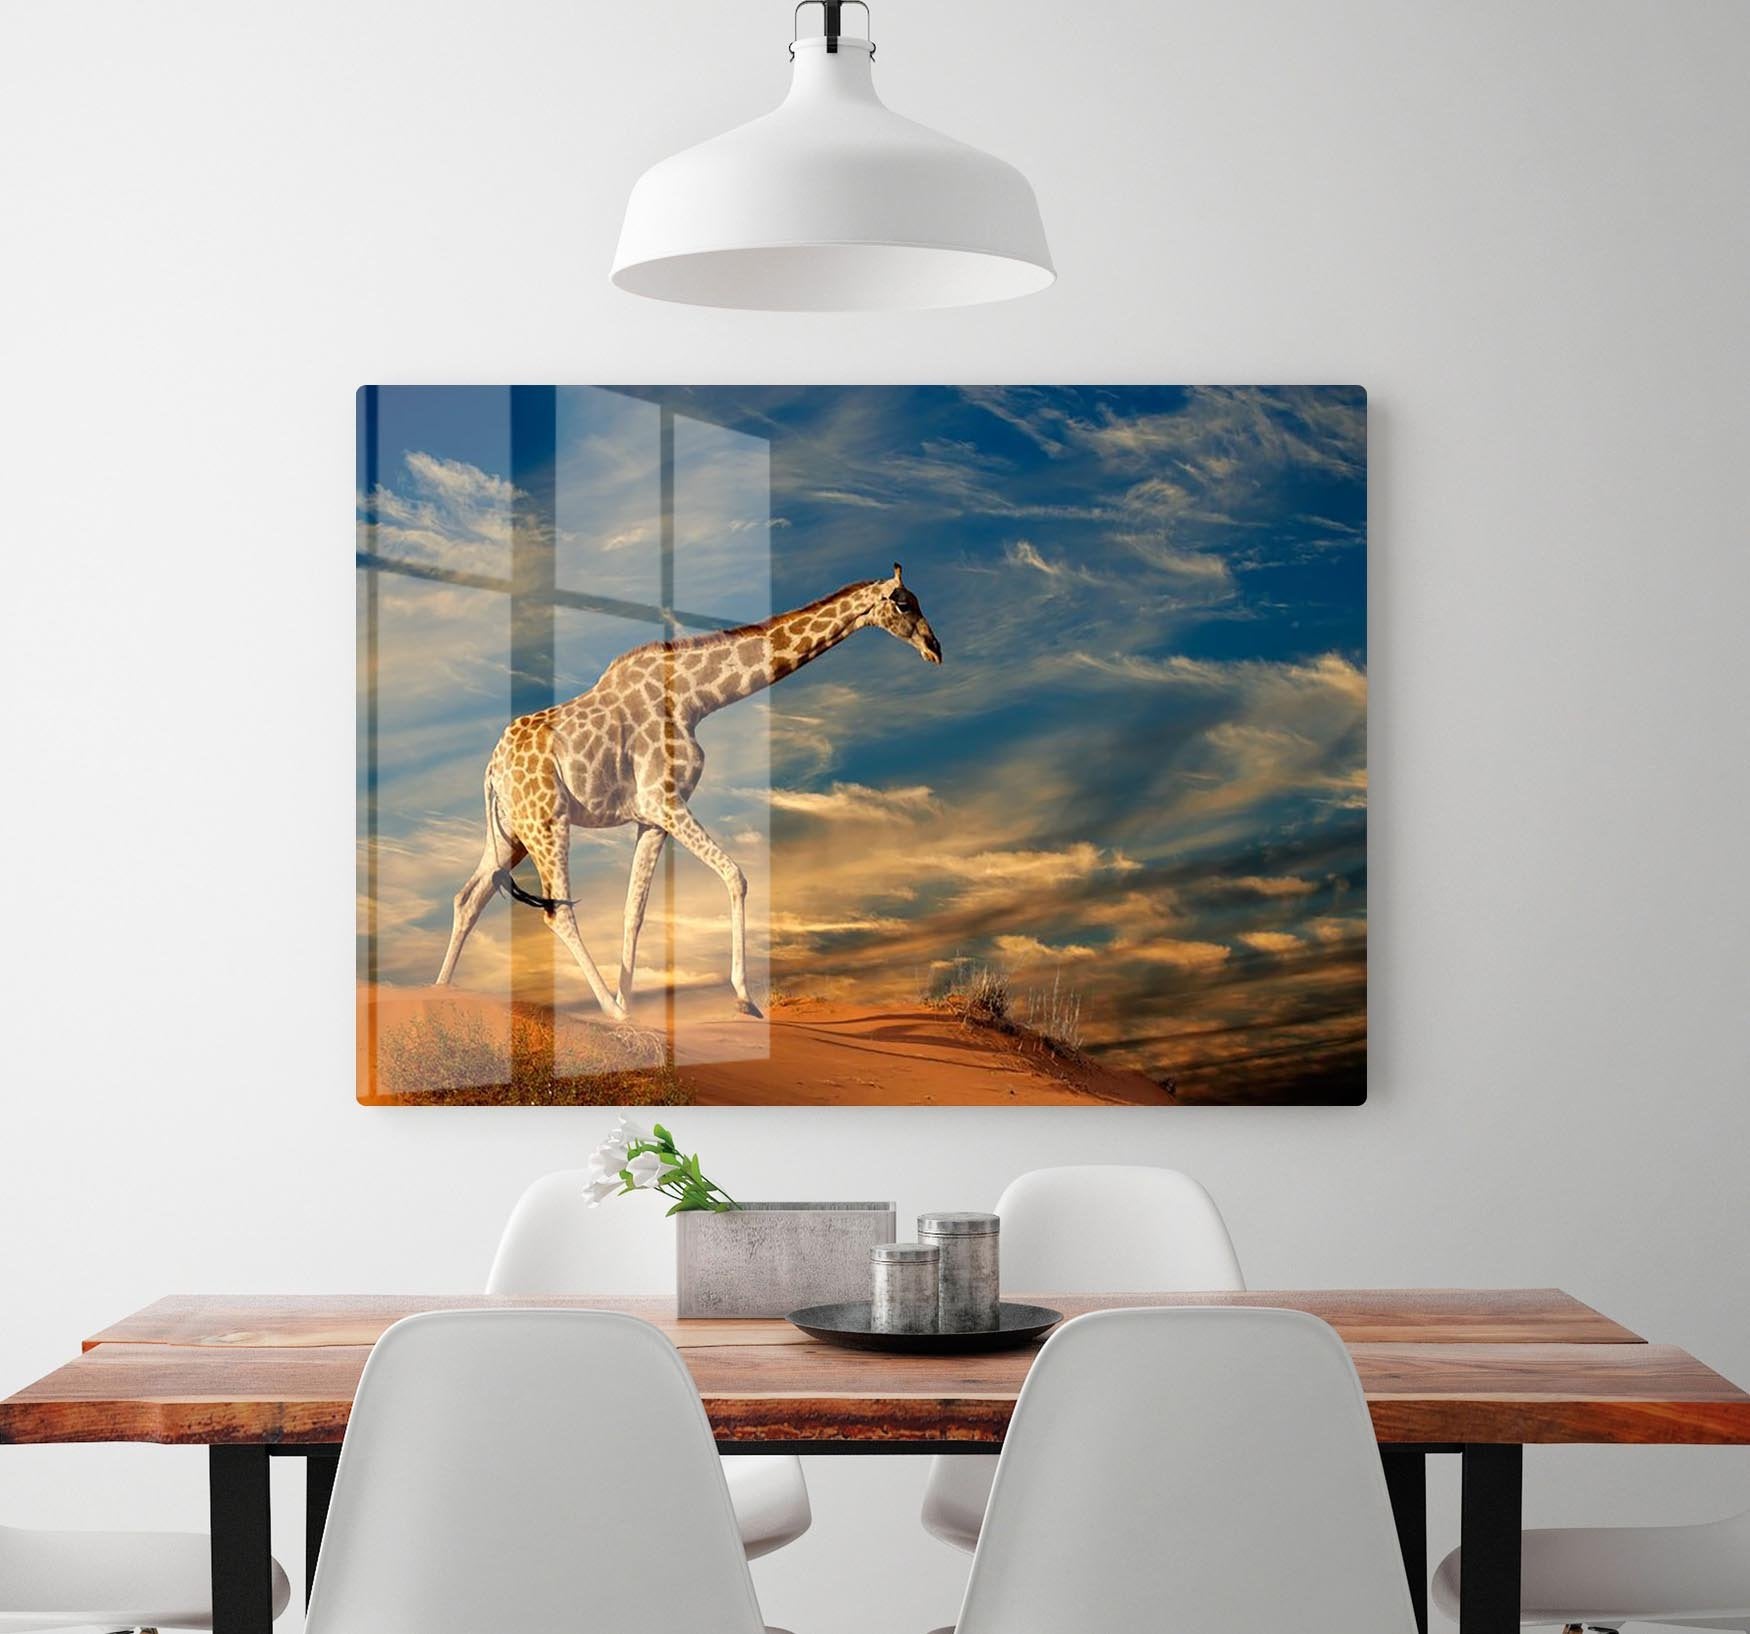 Giraffe walking on a sand dune with clouds South Africa HD Metal Print - Canvas Art Rocks - 2